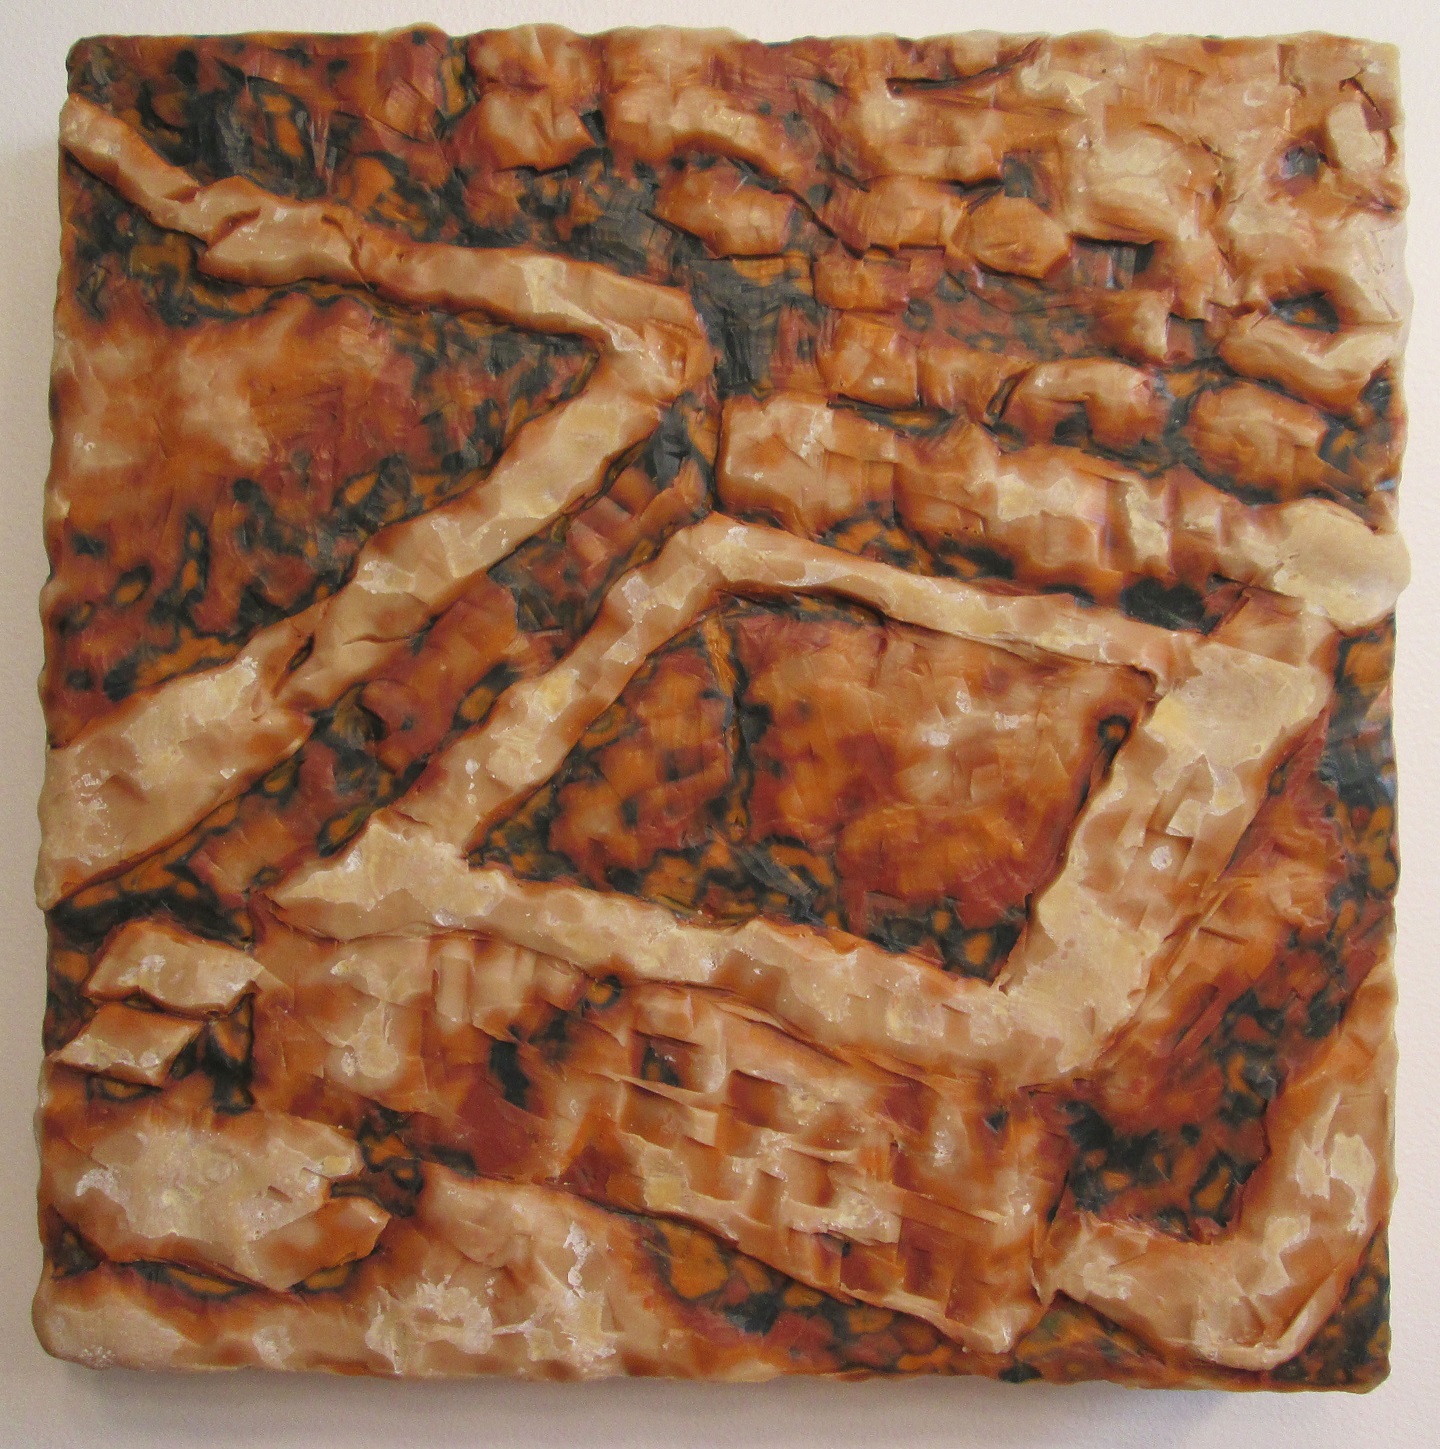 Excavation #8; Layered and carved encaustic with oils on wooden panel; 12"h x 12"w x 2.25"d; 2001